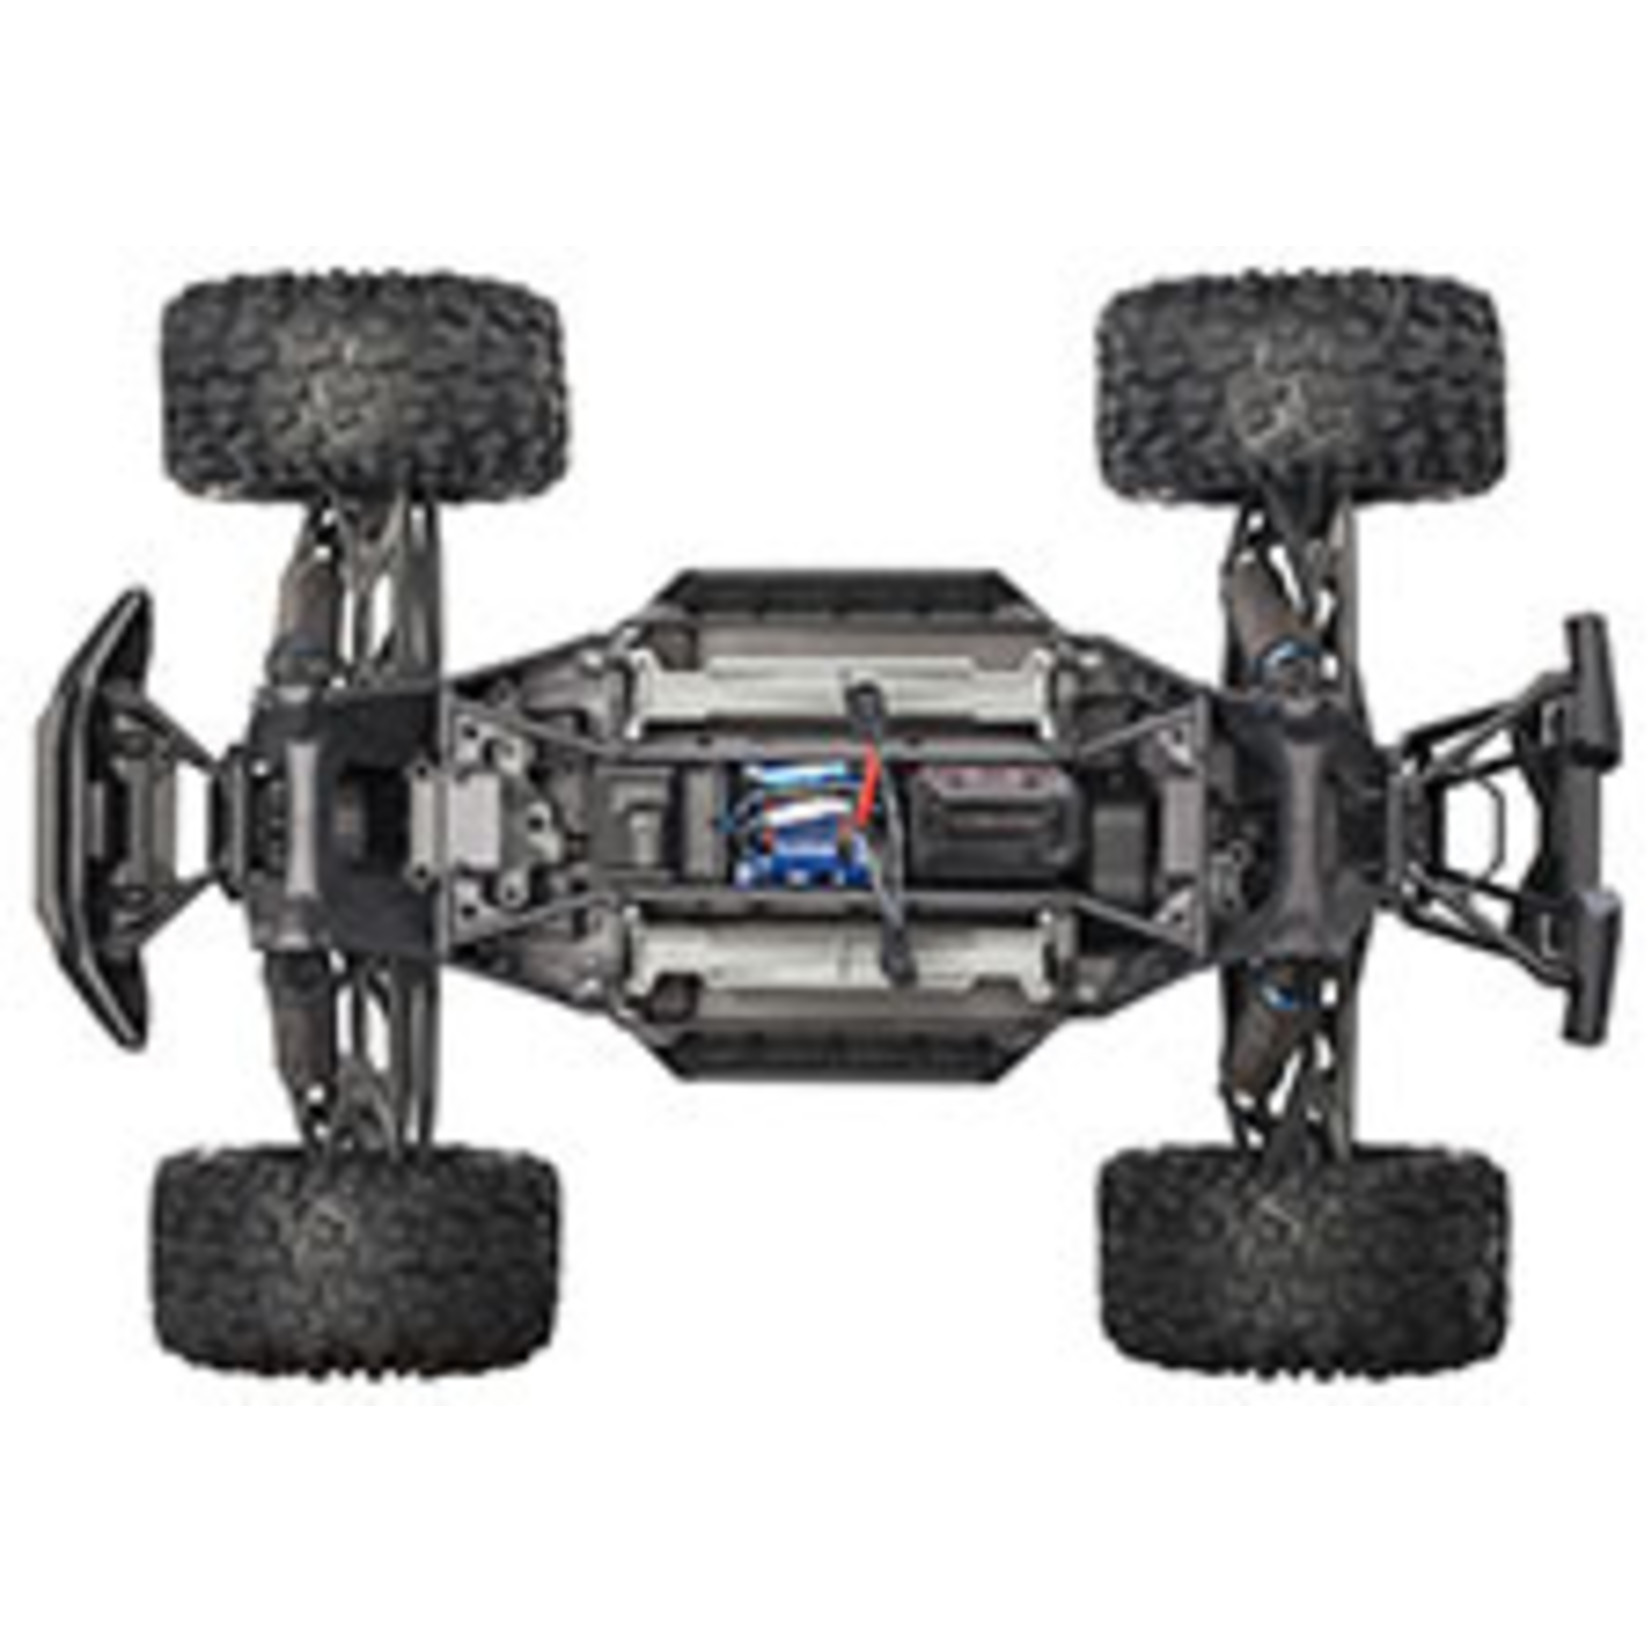 X-Maxx: Brushless Electric Monster Truck with Traxxas Stability